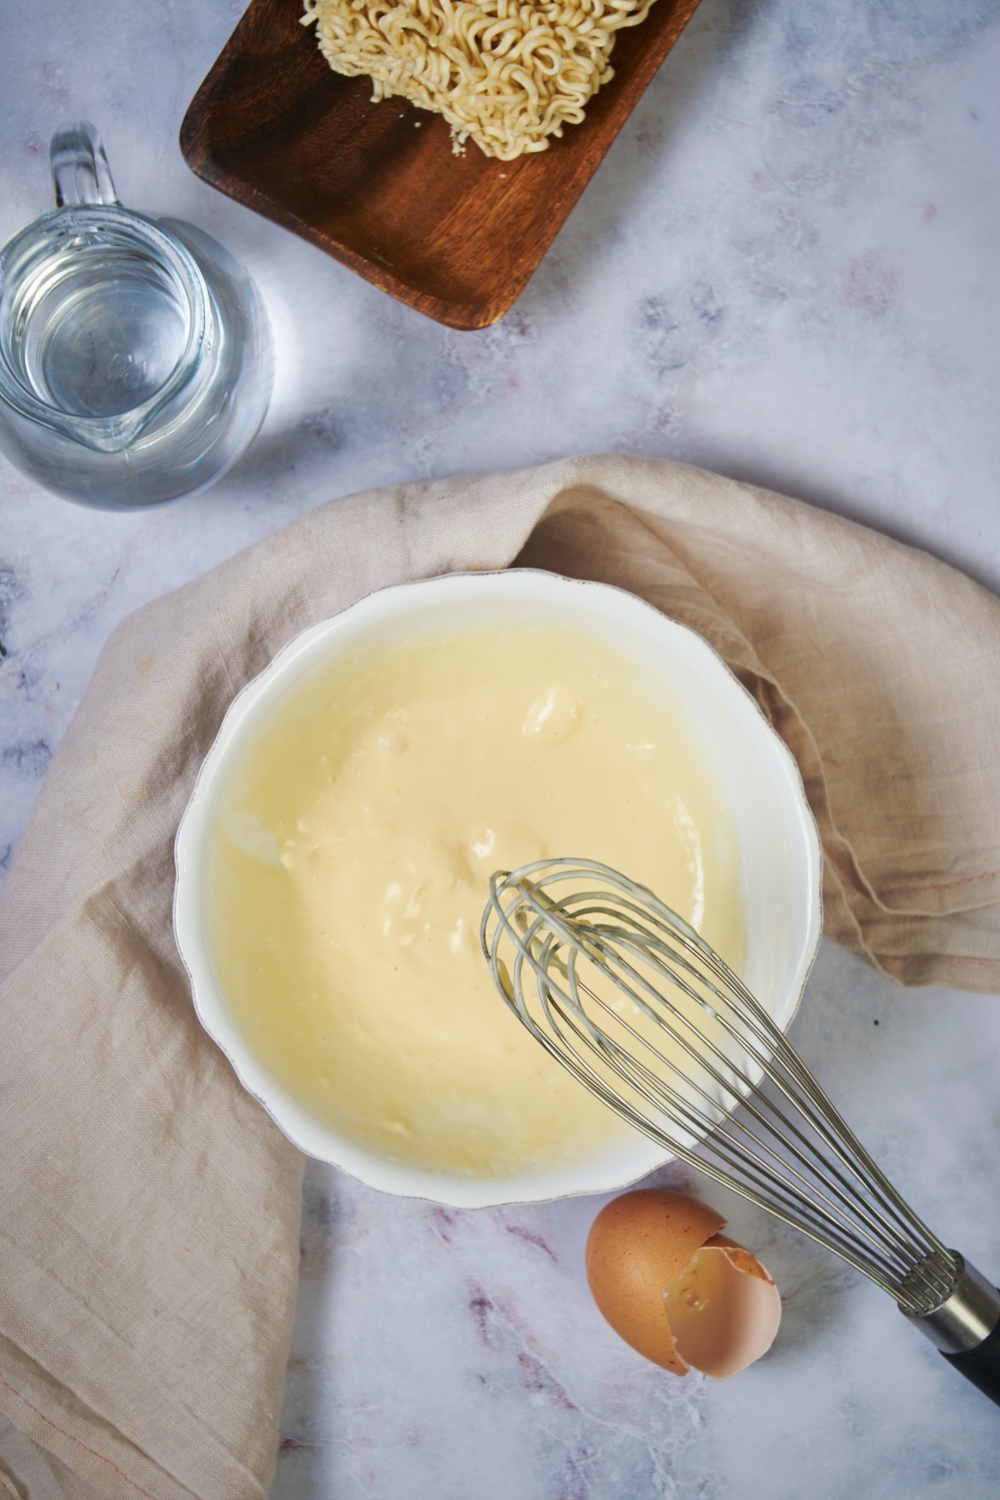 A whisk hovering over a bowl that has a white creamy sauce in it.